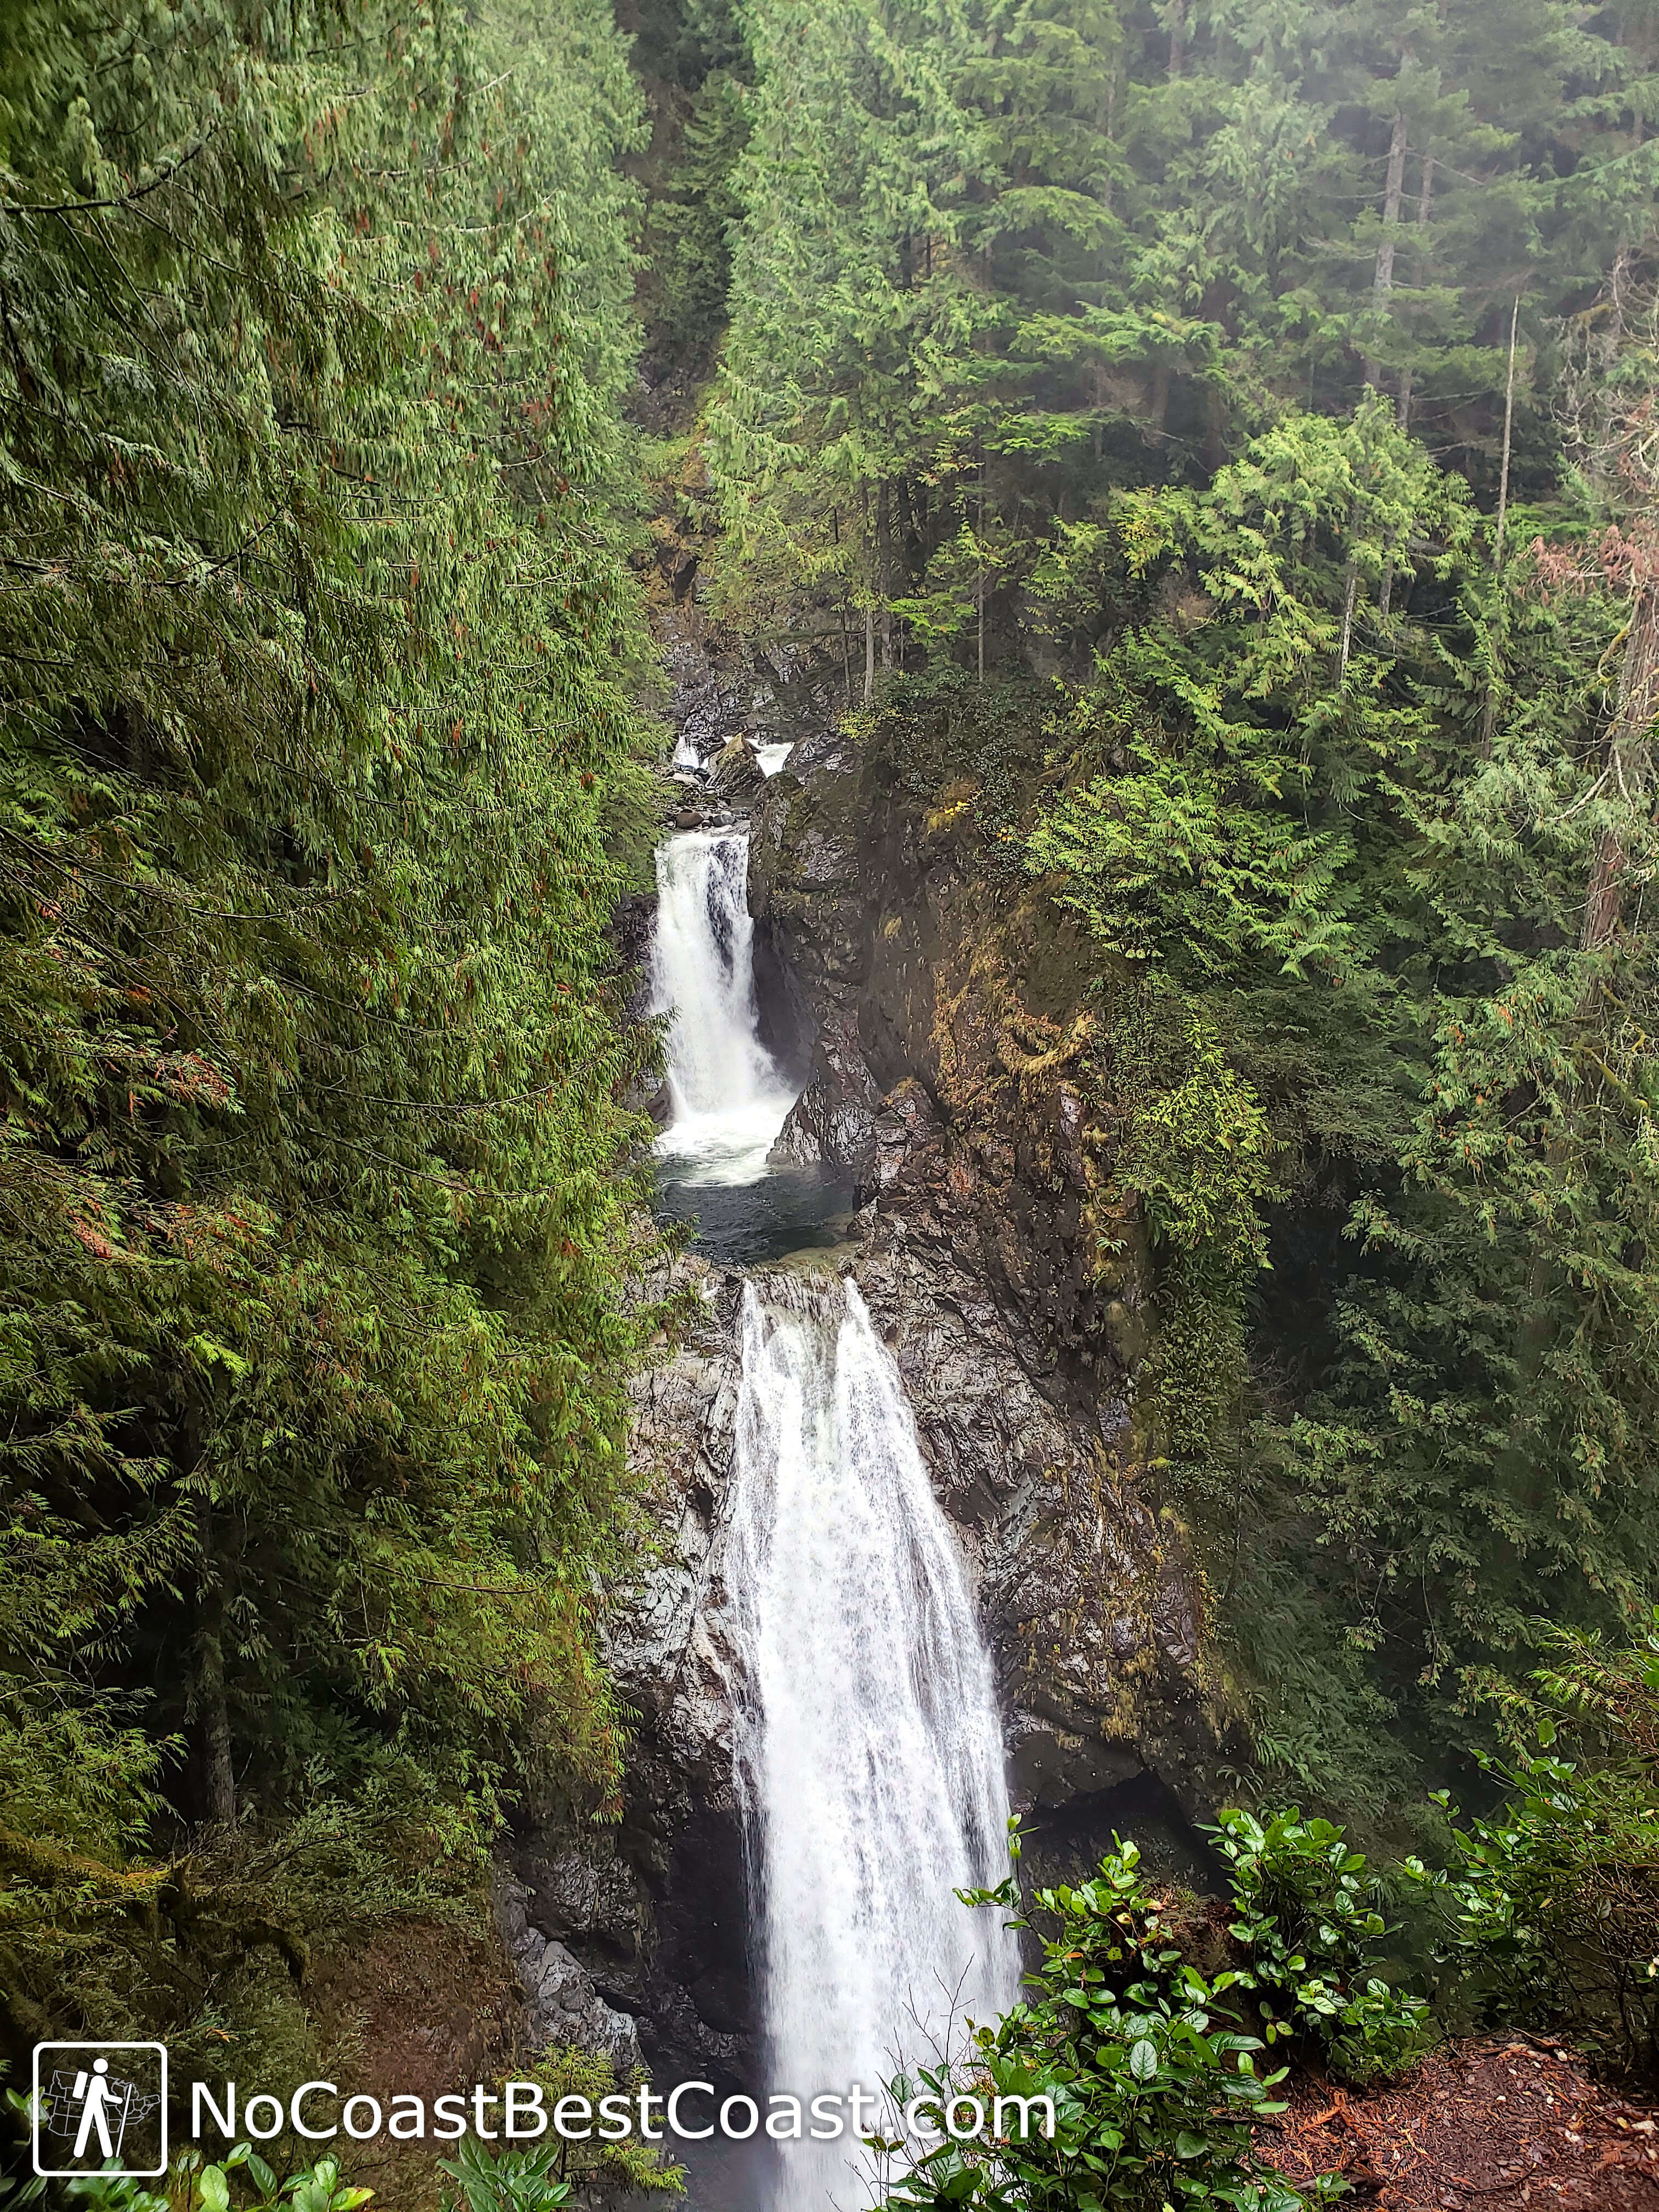 Upper Wallace Falls is your reward after an uphill climb